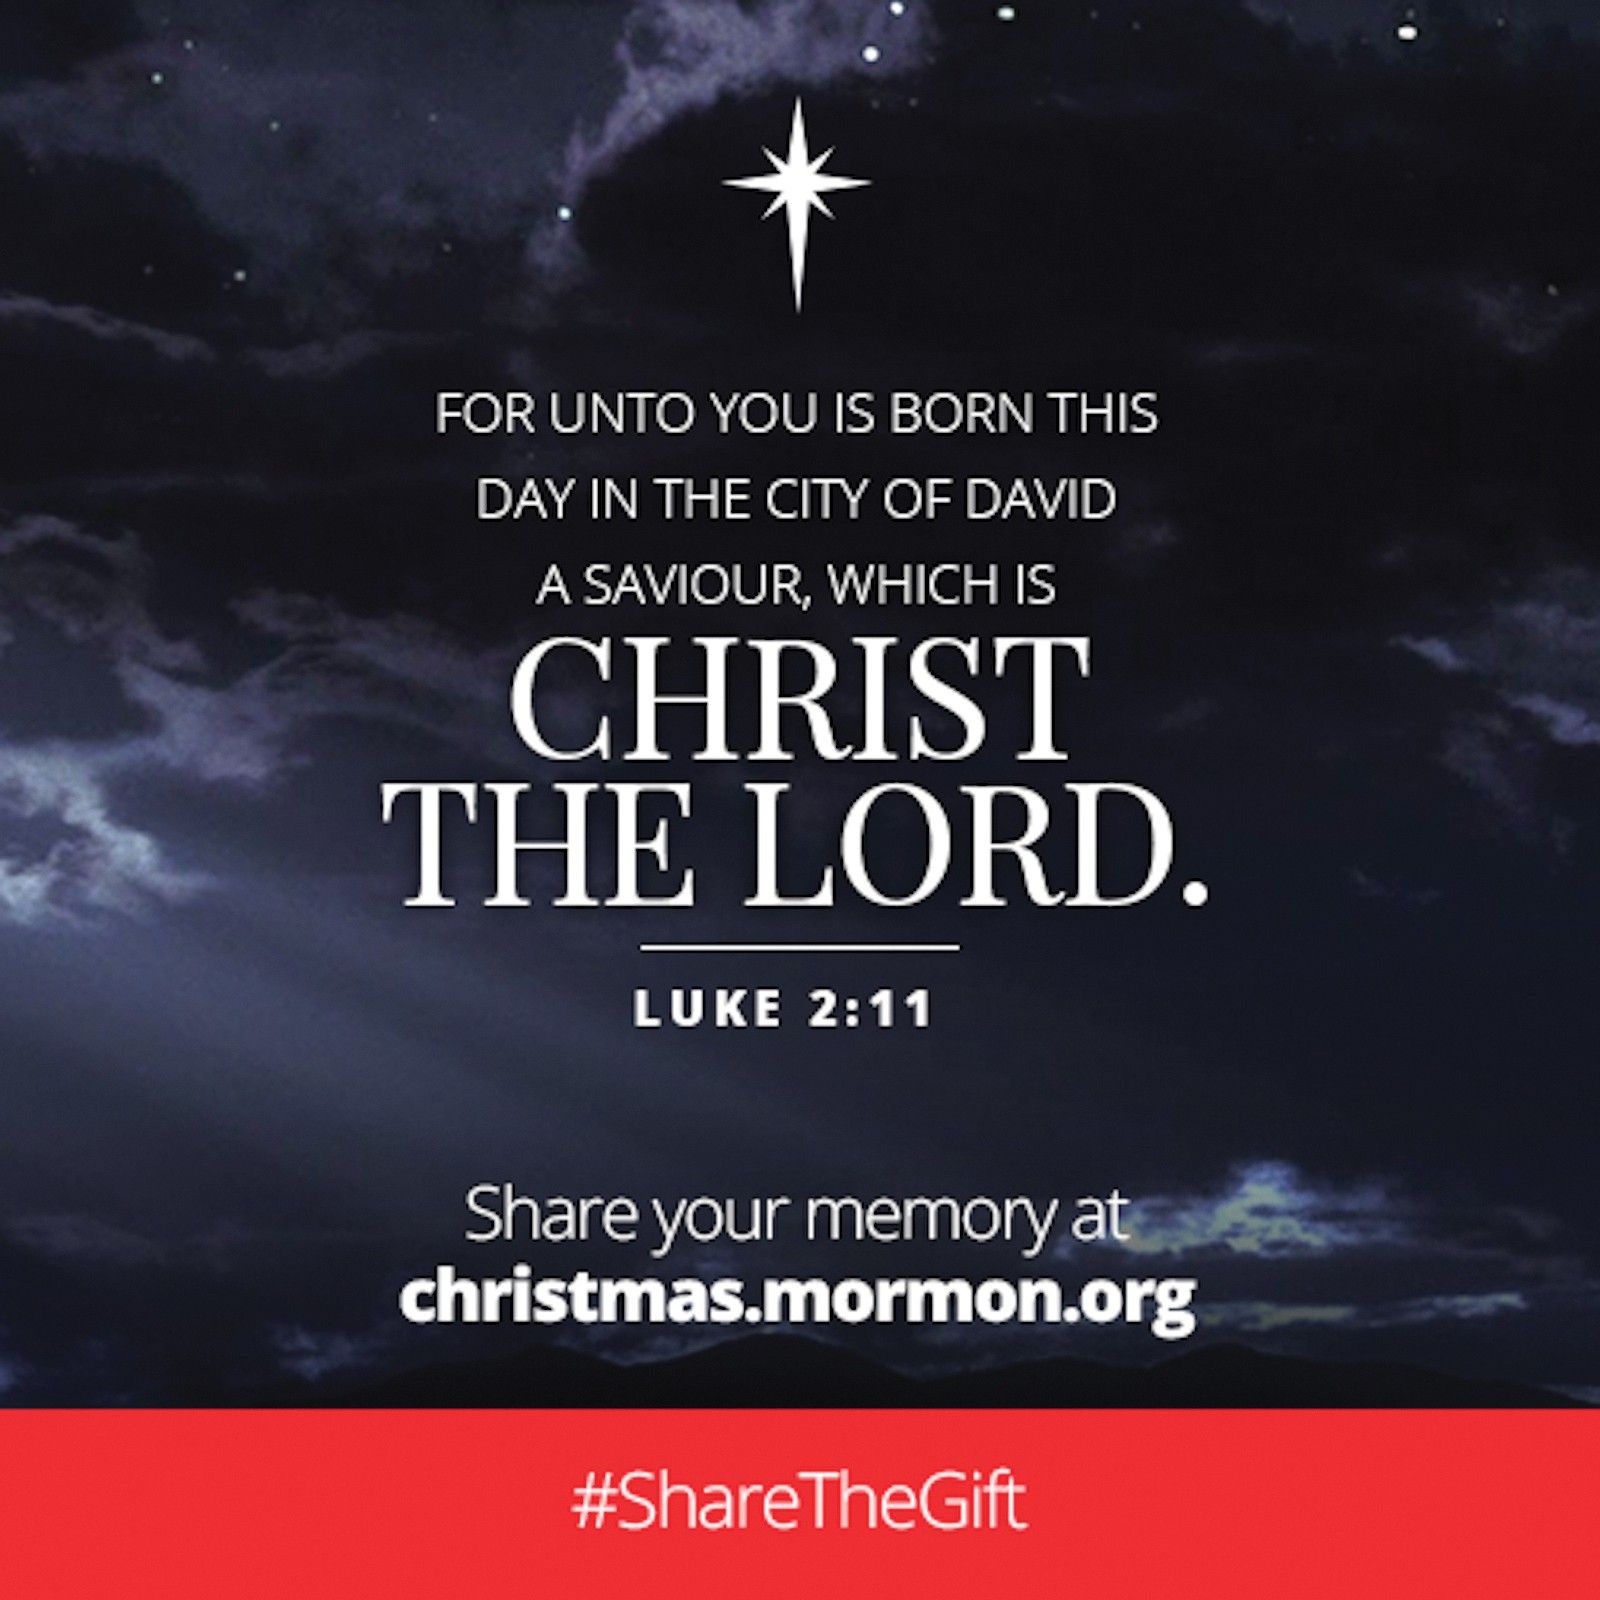 “For unto you is born this day in the city of David a Saviour, which is Christ the Lord.”—Luke 2:11. Share your memory at christmas.mormon.org. #ShareTheGift